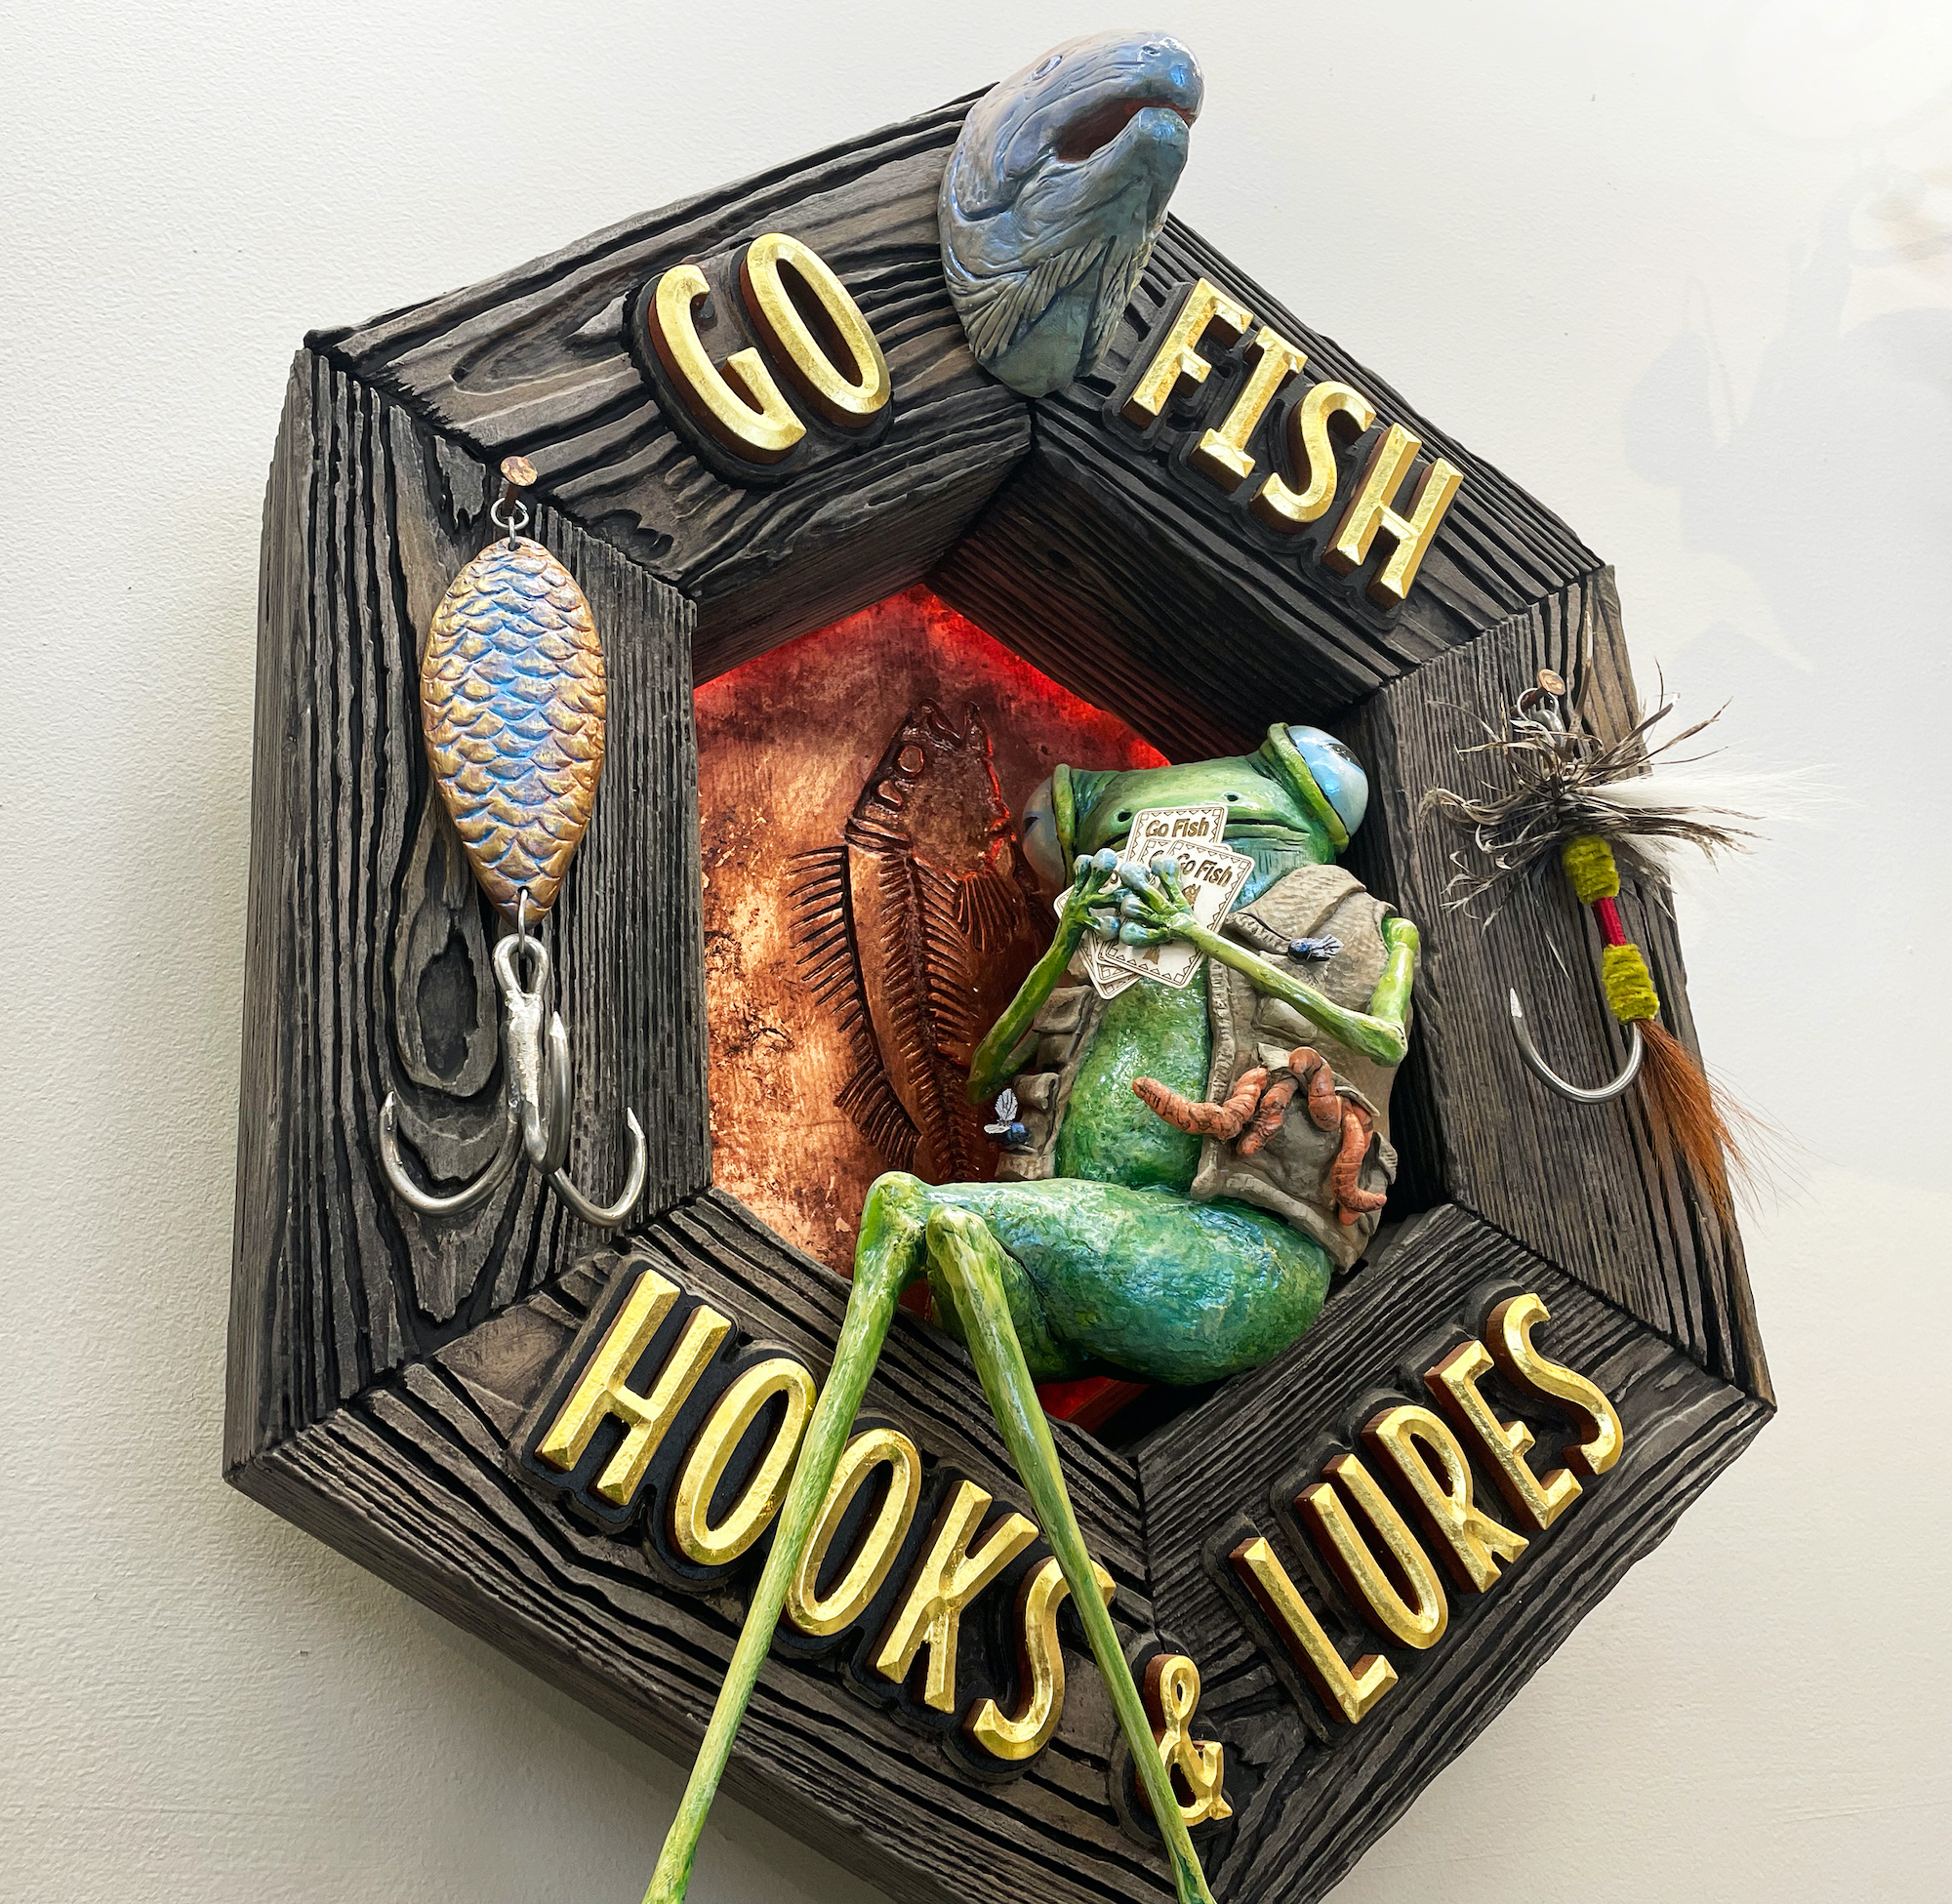 3D sign featuring a frog hanging on the wall.